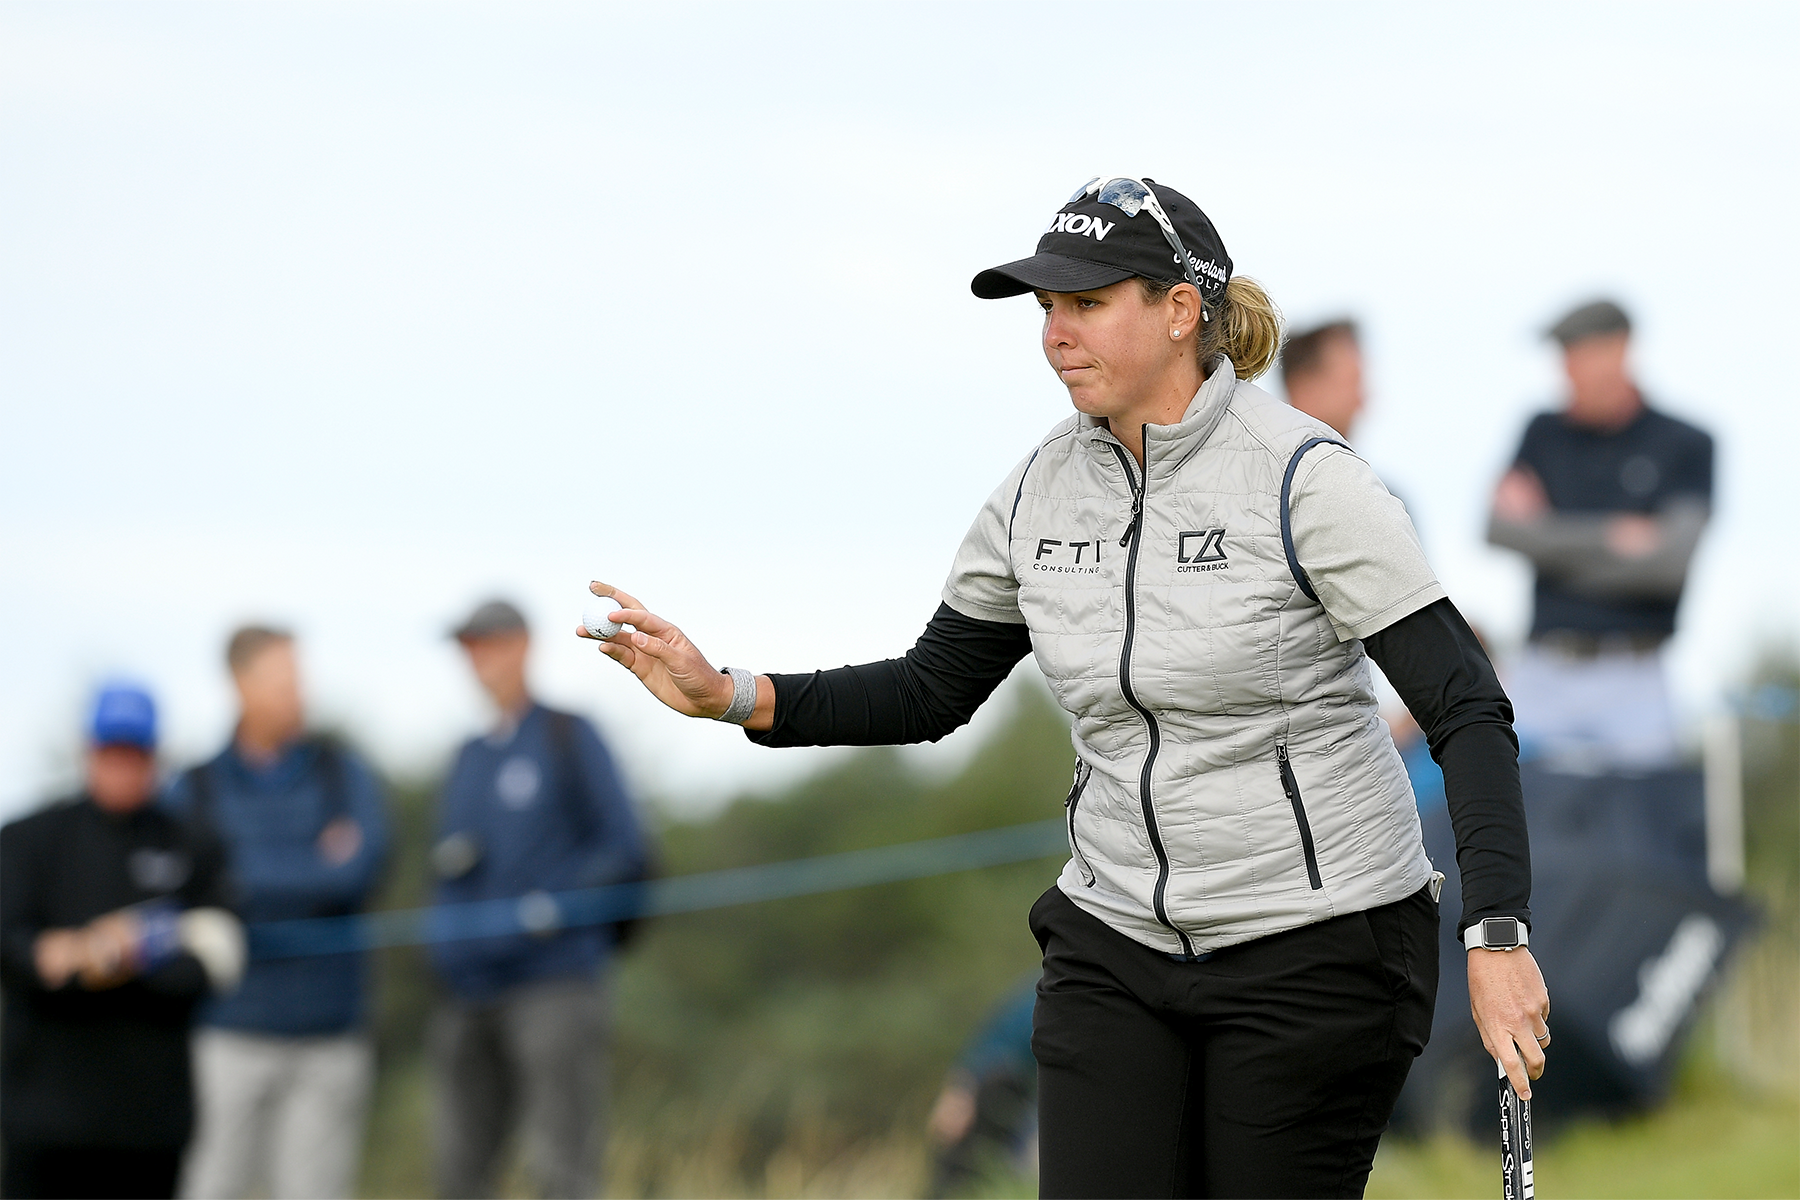 Ashleigh Buhai of South Africa acknowledge to the fans after playing her putt shot from the 13th hole during Day Three of the AIG Women's Open at Muirfield on August 06, 2022 in Gullane, Scotland. (Photo by Octavio Passos/Getty Images)